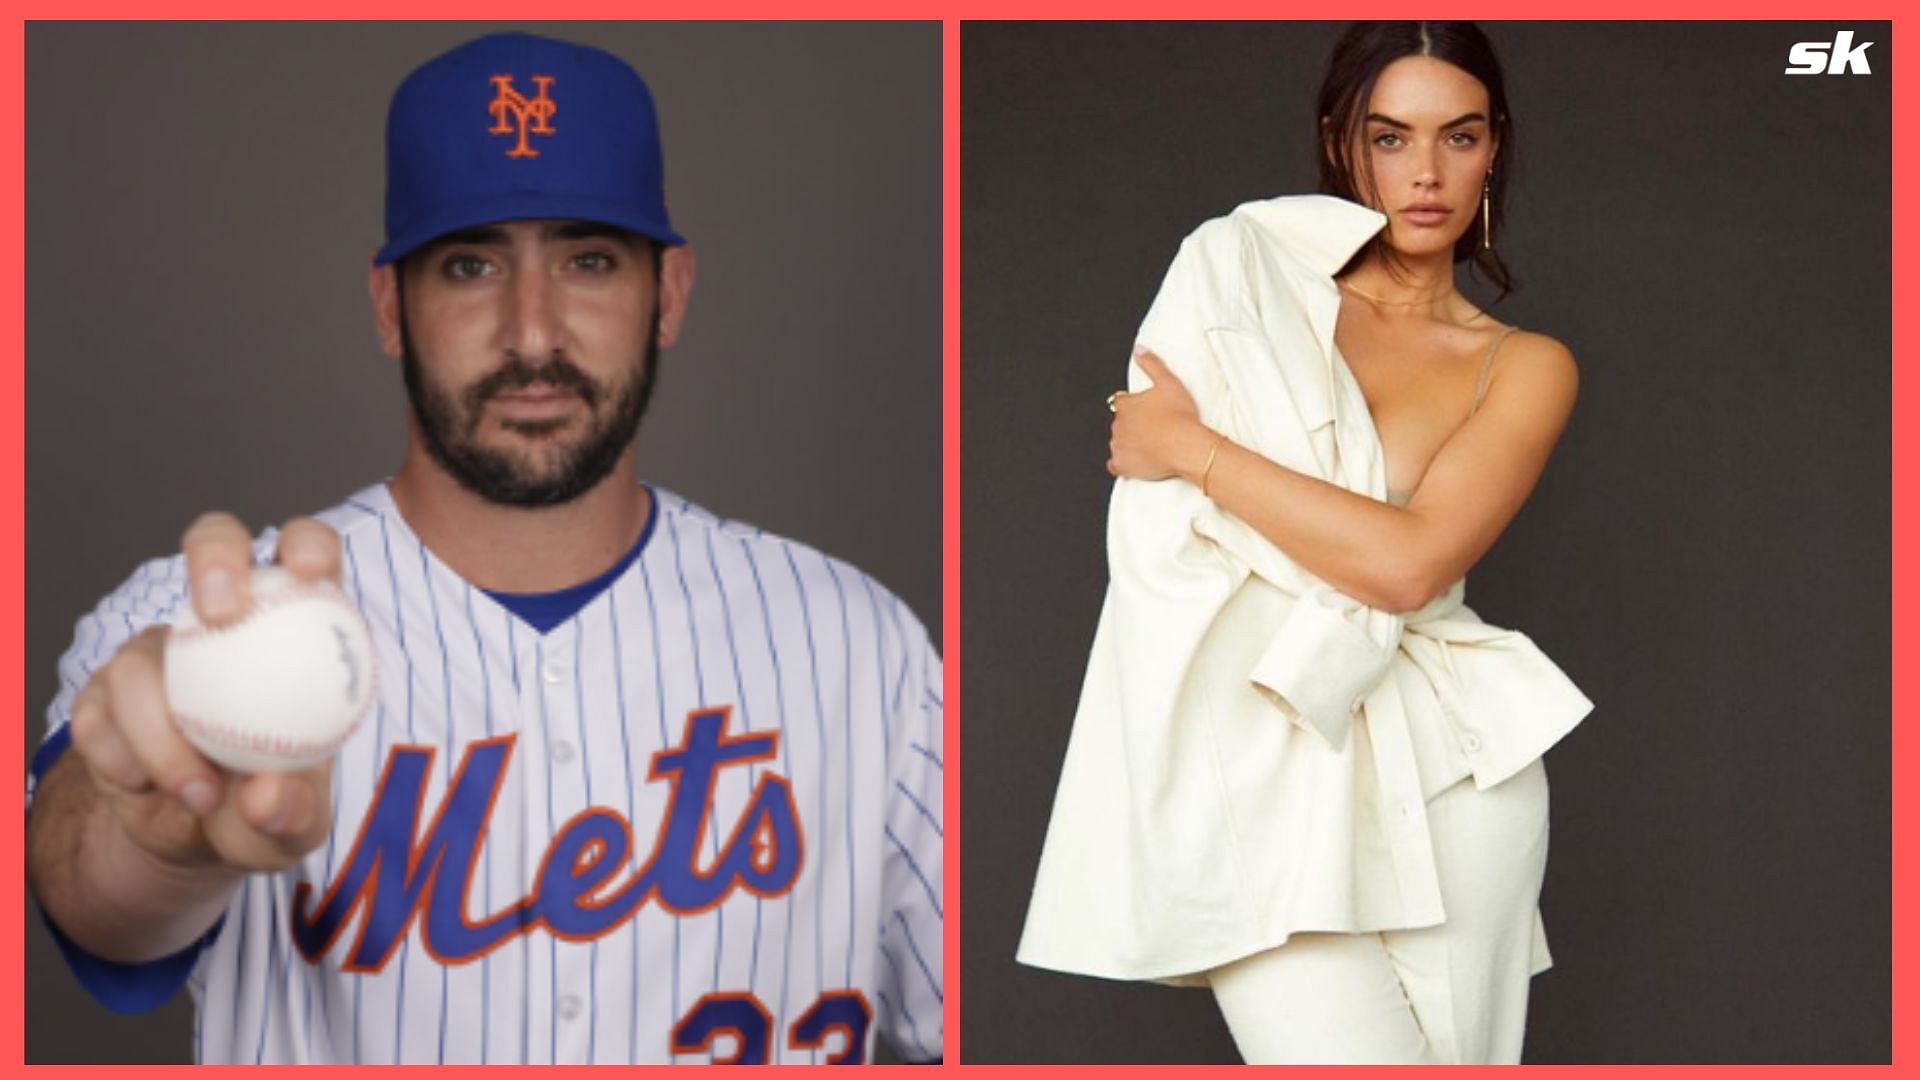 Monika Clarke ends relationship with Matt Harvey: He just became obsessed  with his new job